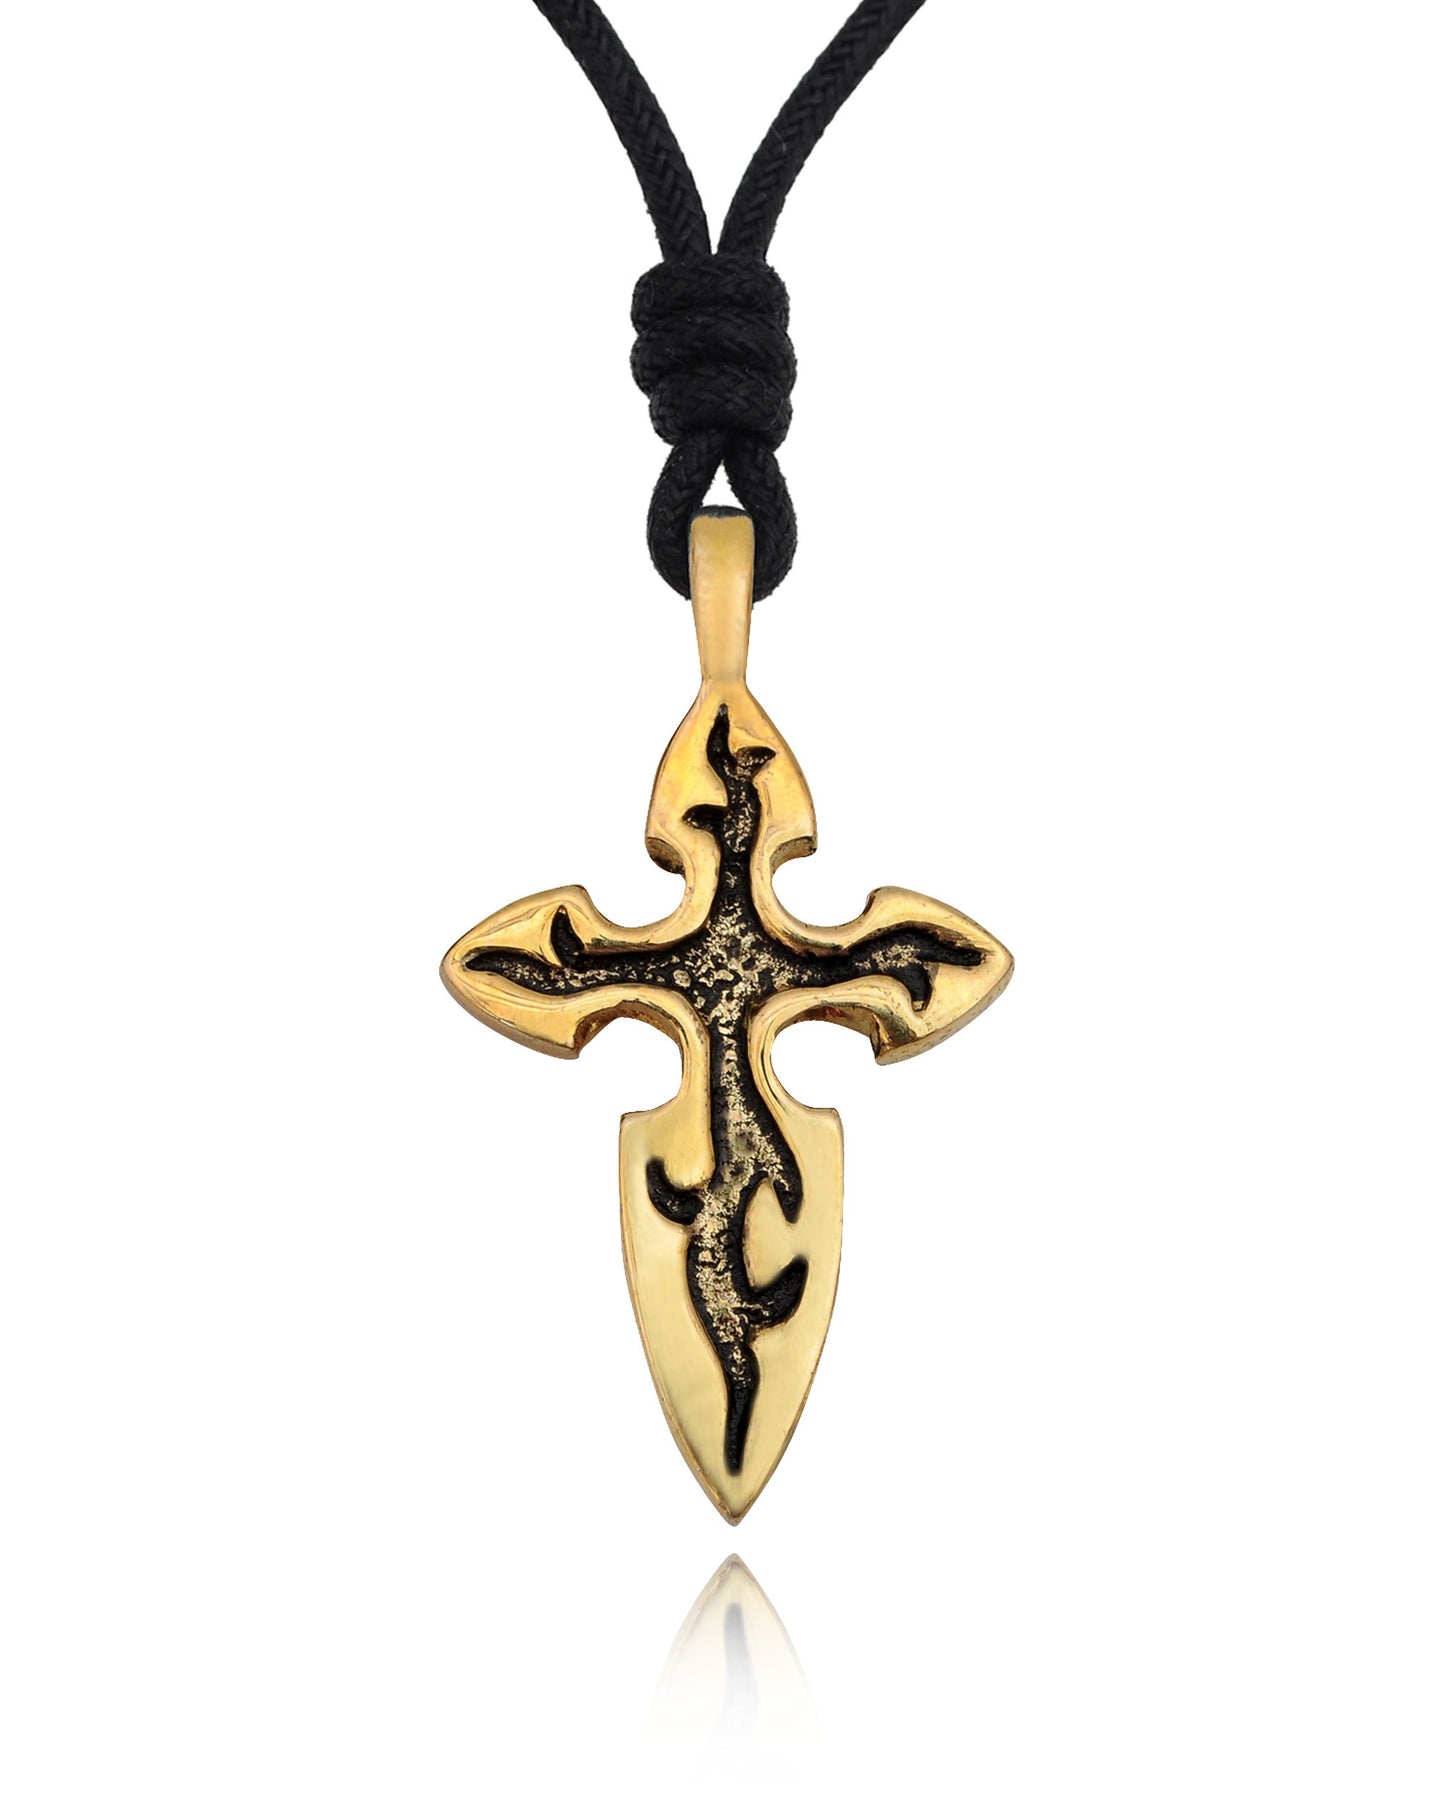 Gothic Cross Symbol Silver Pewter Gold Brass Charm Necklace Pendant Jewelry